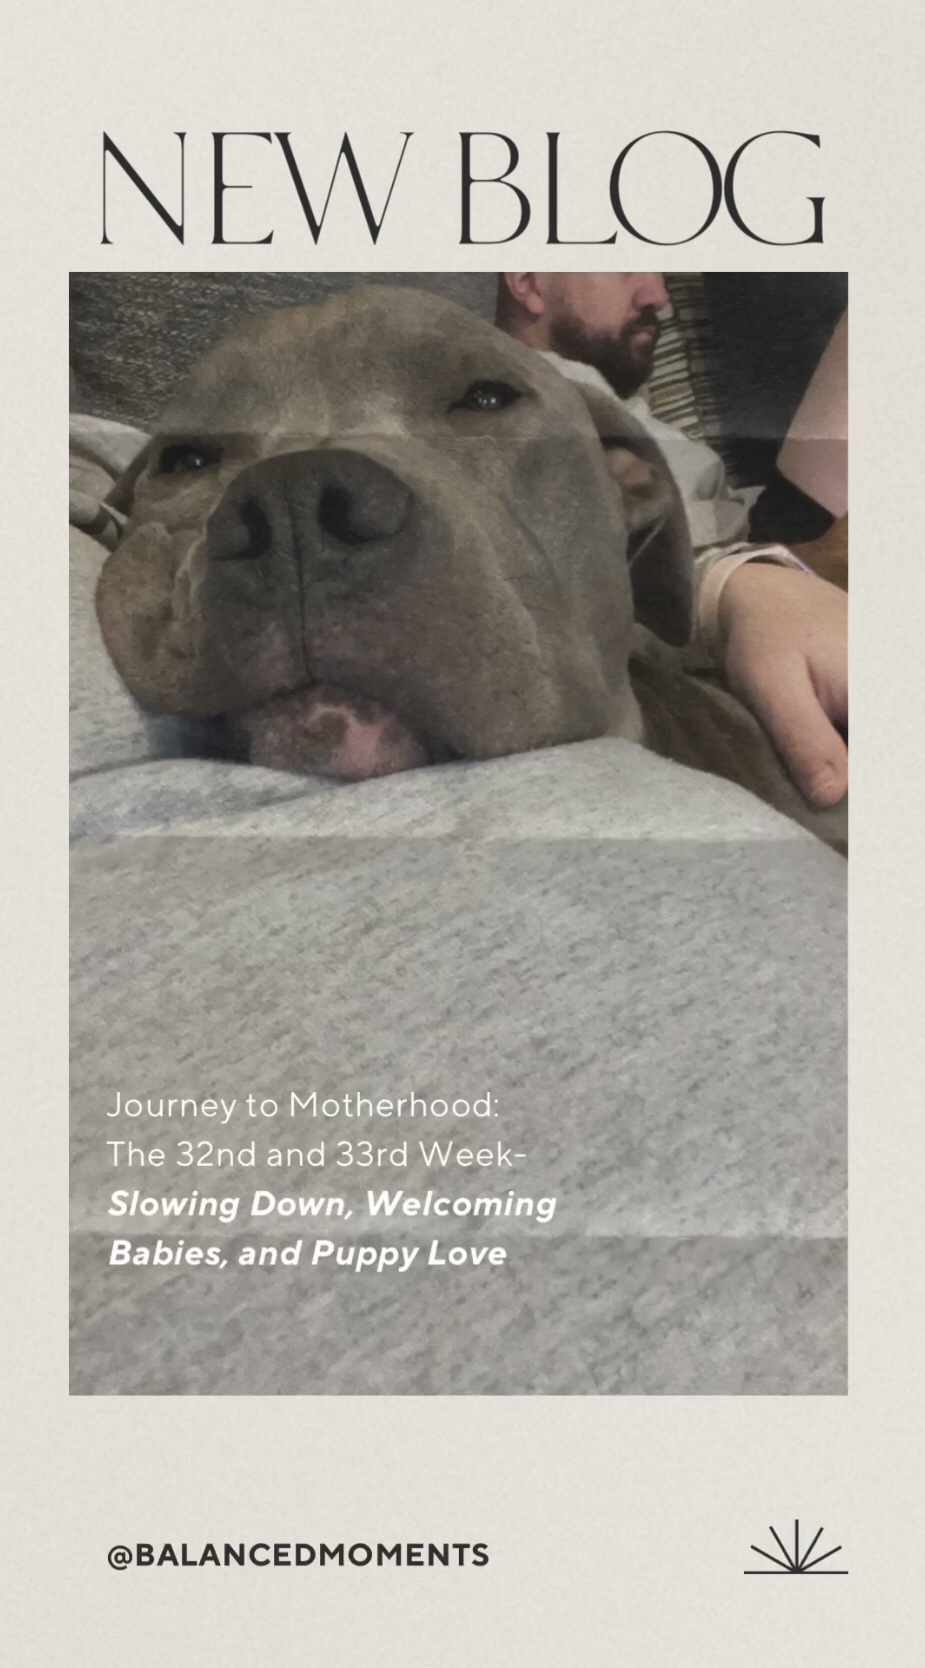 The Journey to Motherhood: The 32nd & 33rd Week- Slowing Down, Welcoming Babies, and Puppy Love